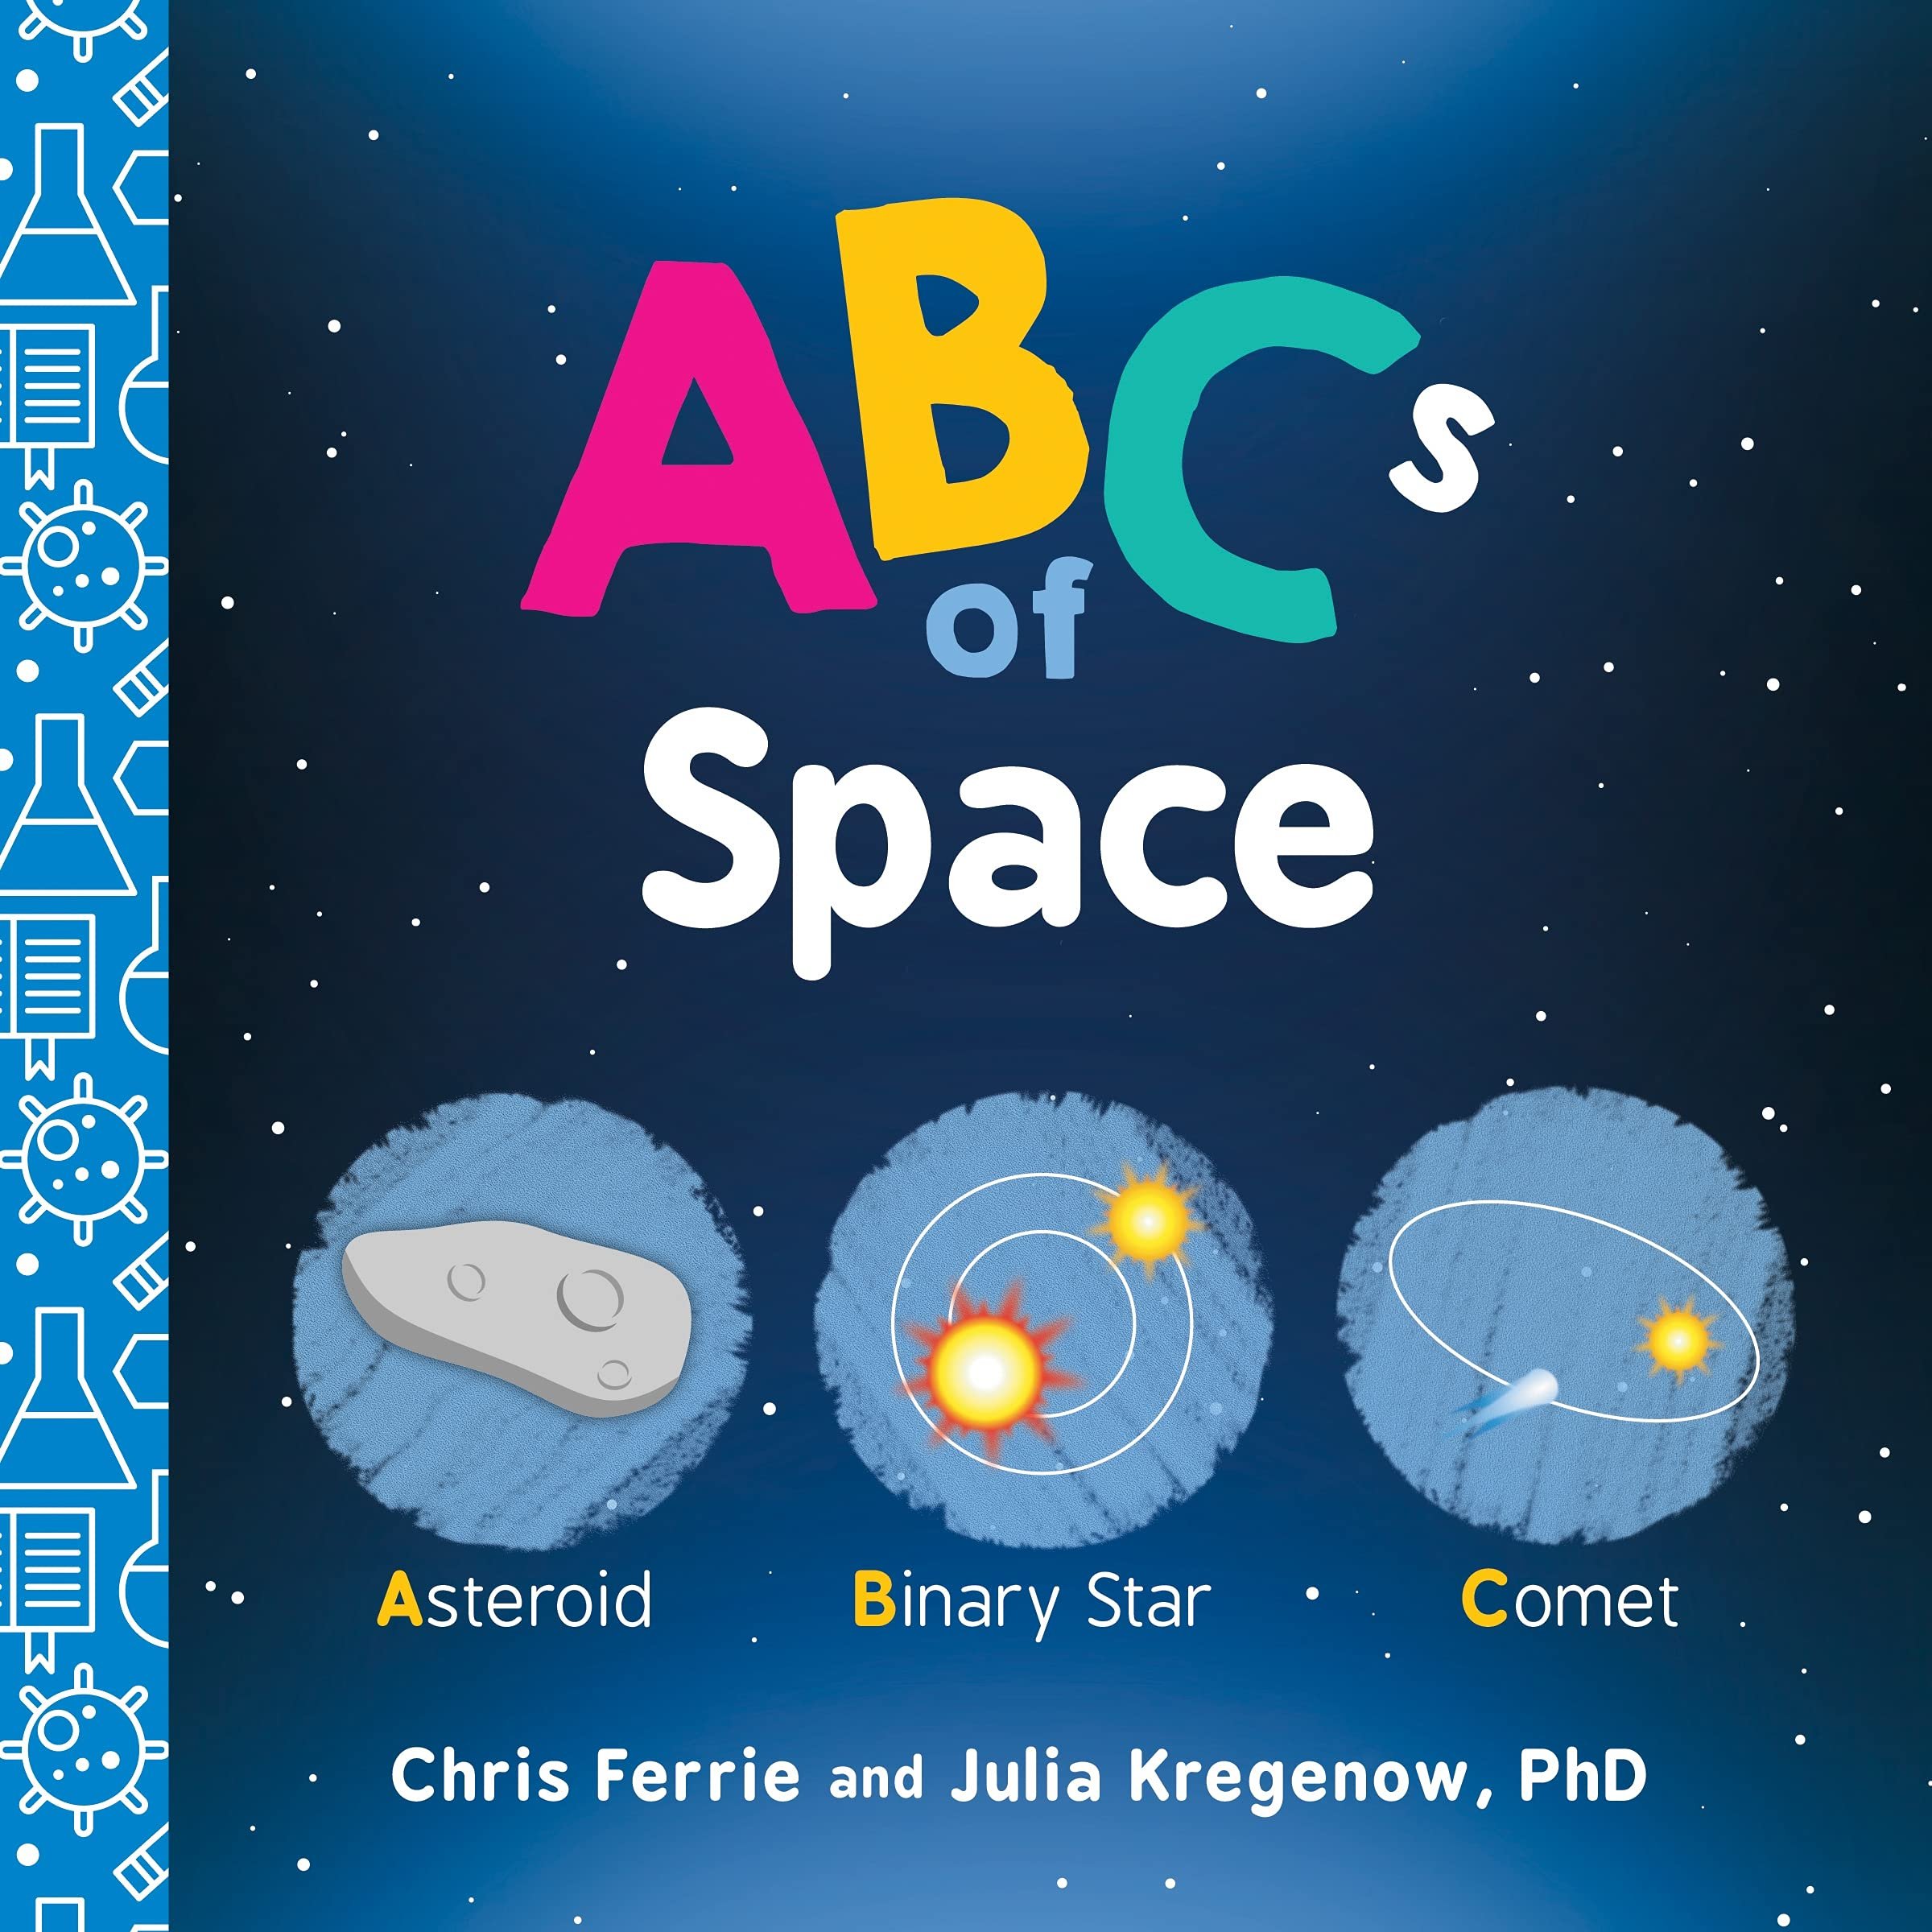 ABCs of Space.jpeg